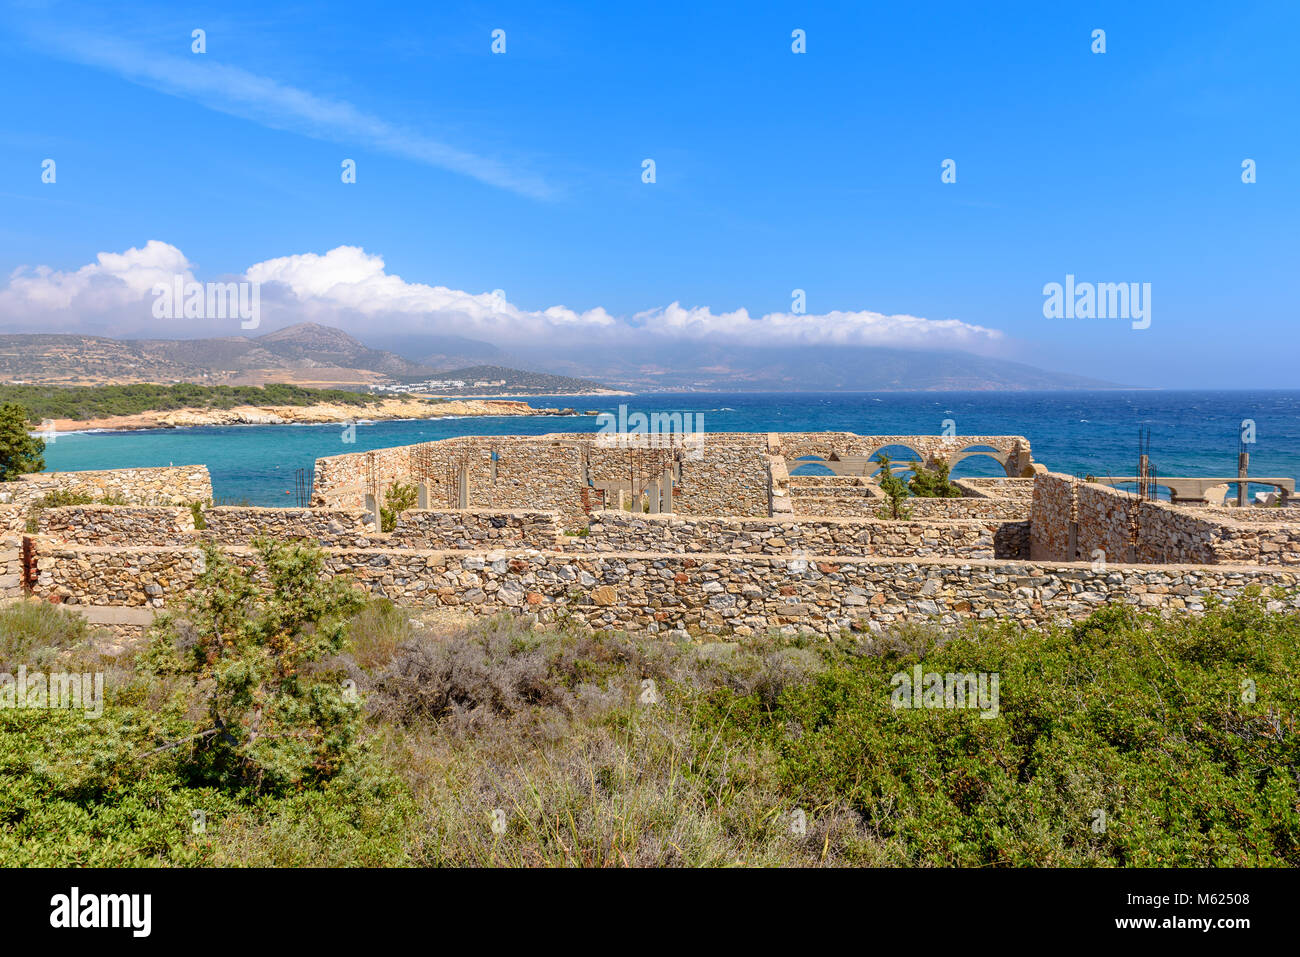 Hotel building under construction with a view of the sea on western side of Naxos island. Cyclades, Greece Stock Photo